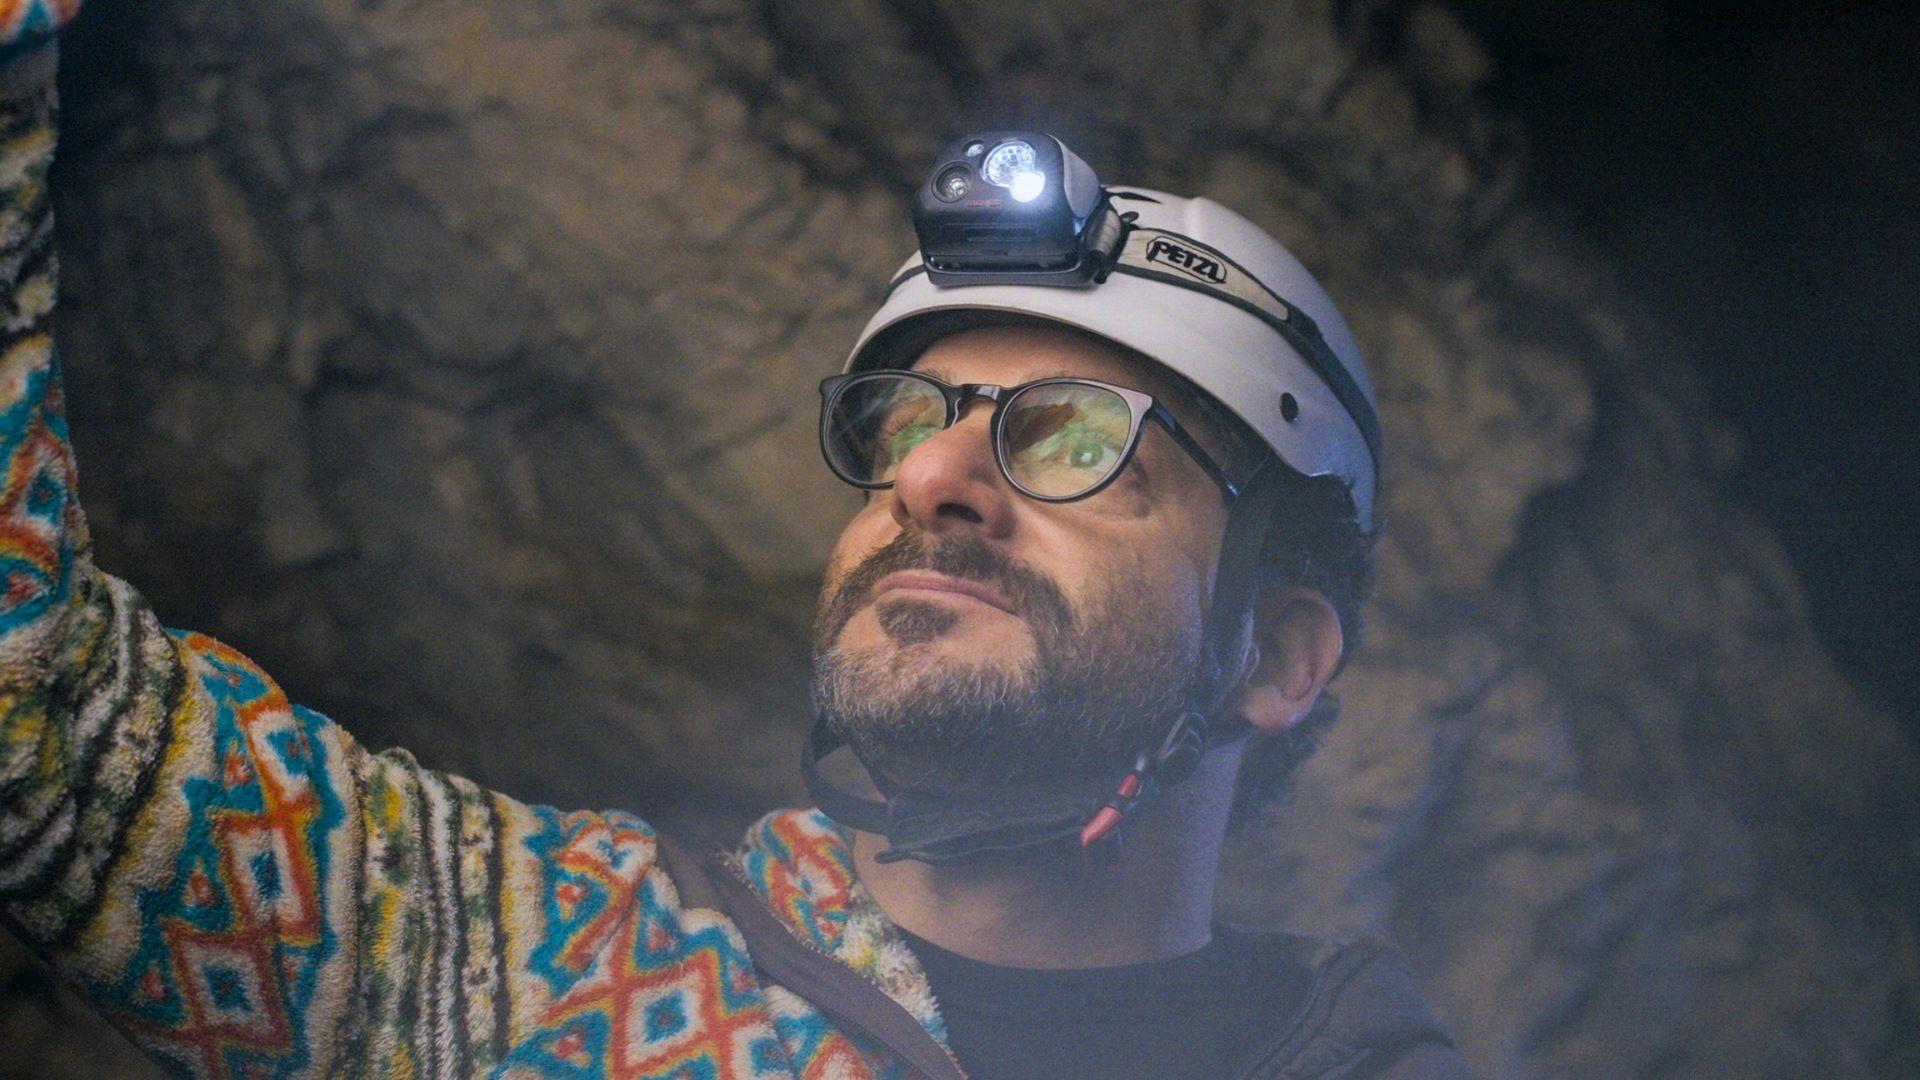 Ari Wallach wears a helmet with a headlamp while looking up in a cave.